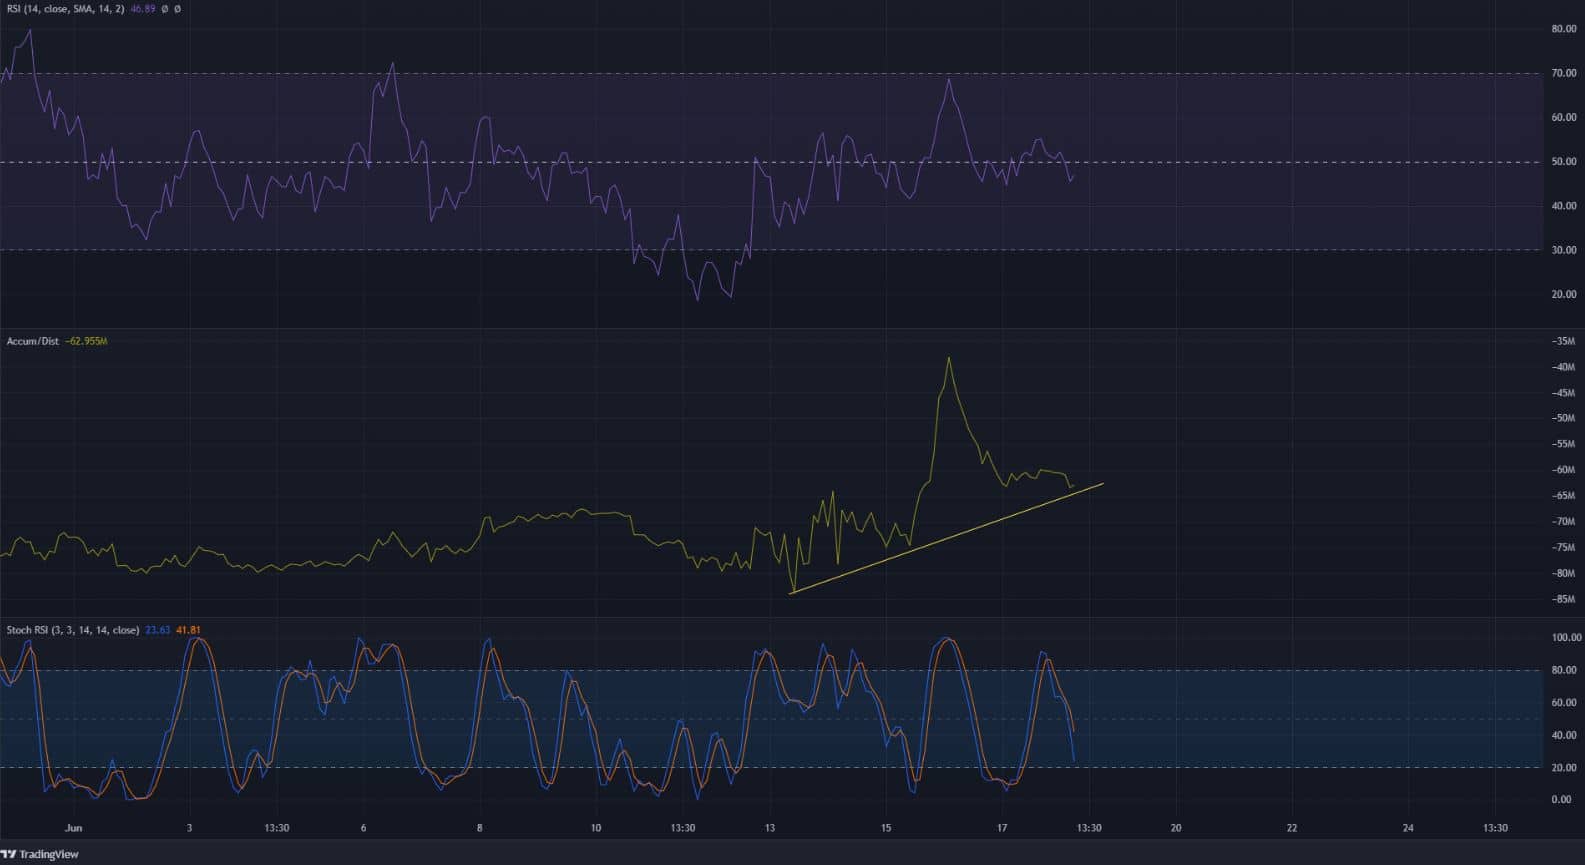 Decentraland shows some bullish intent on the price charts, is an upward move imminent?